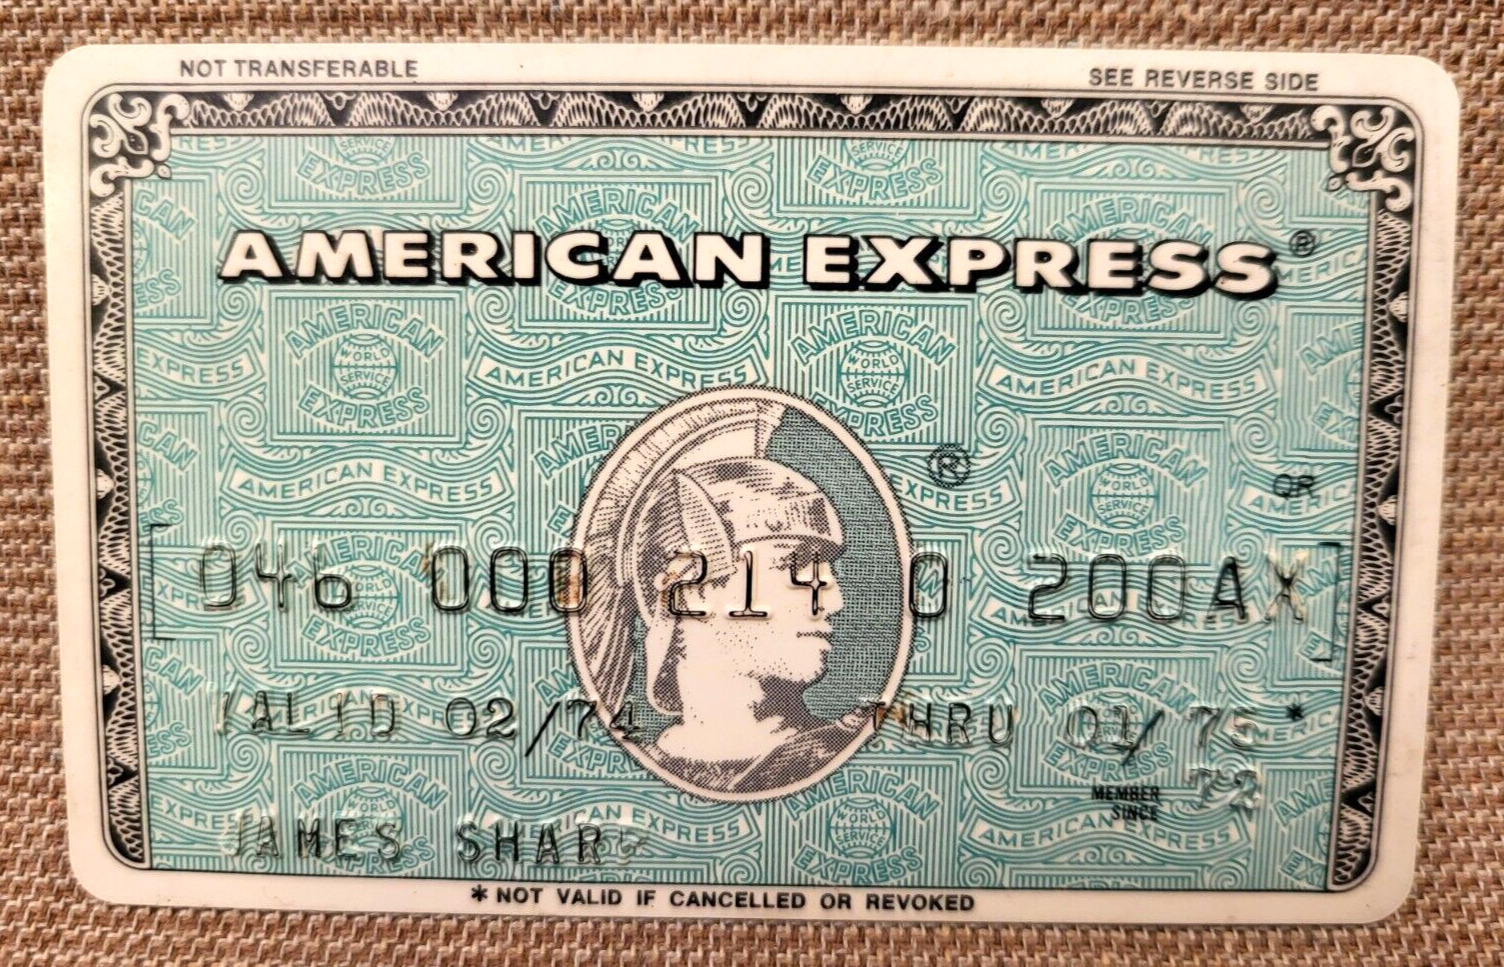 Genuine 1974 1970\'s Vintage Expired American Express Credit Card